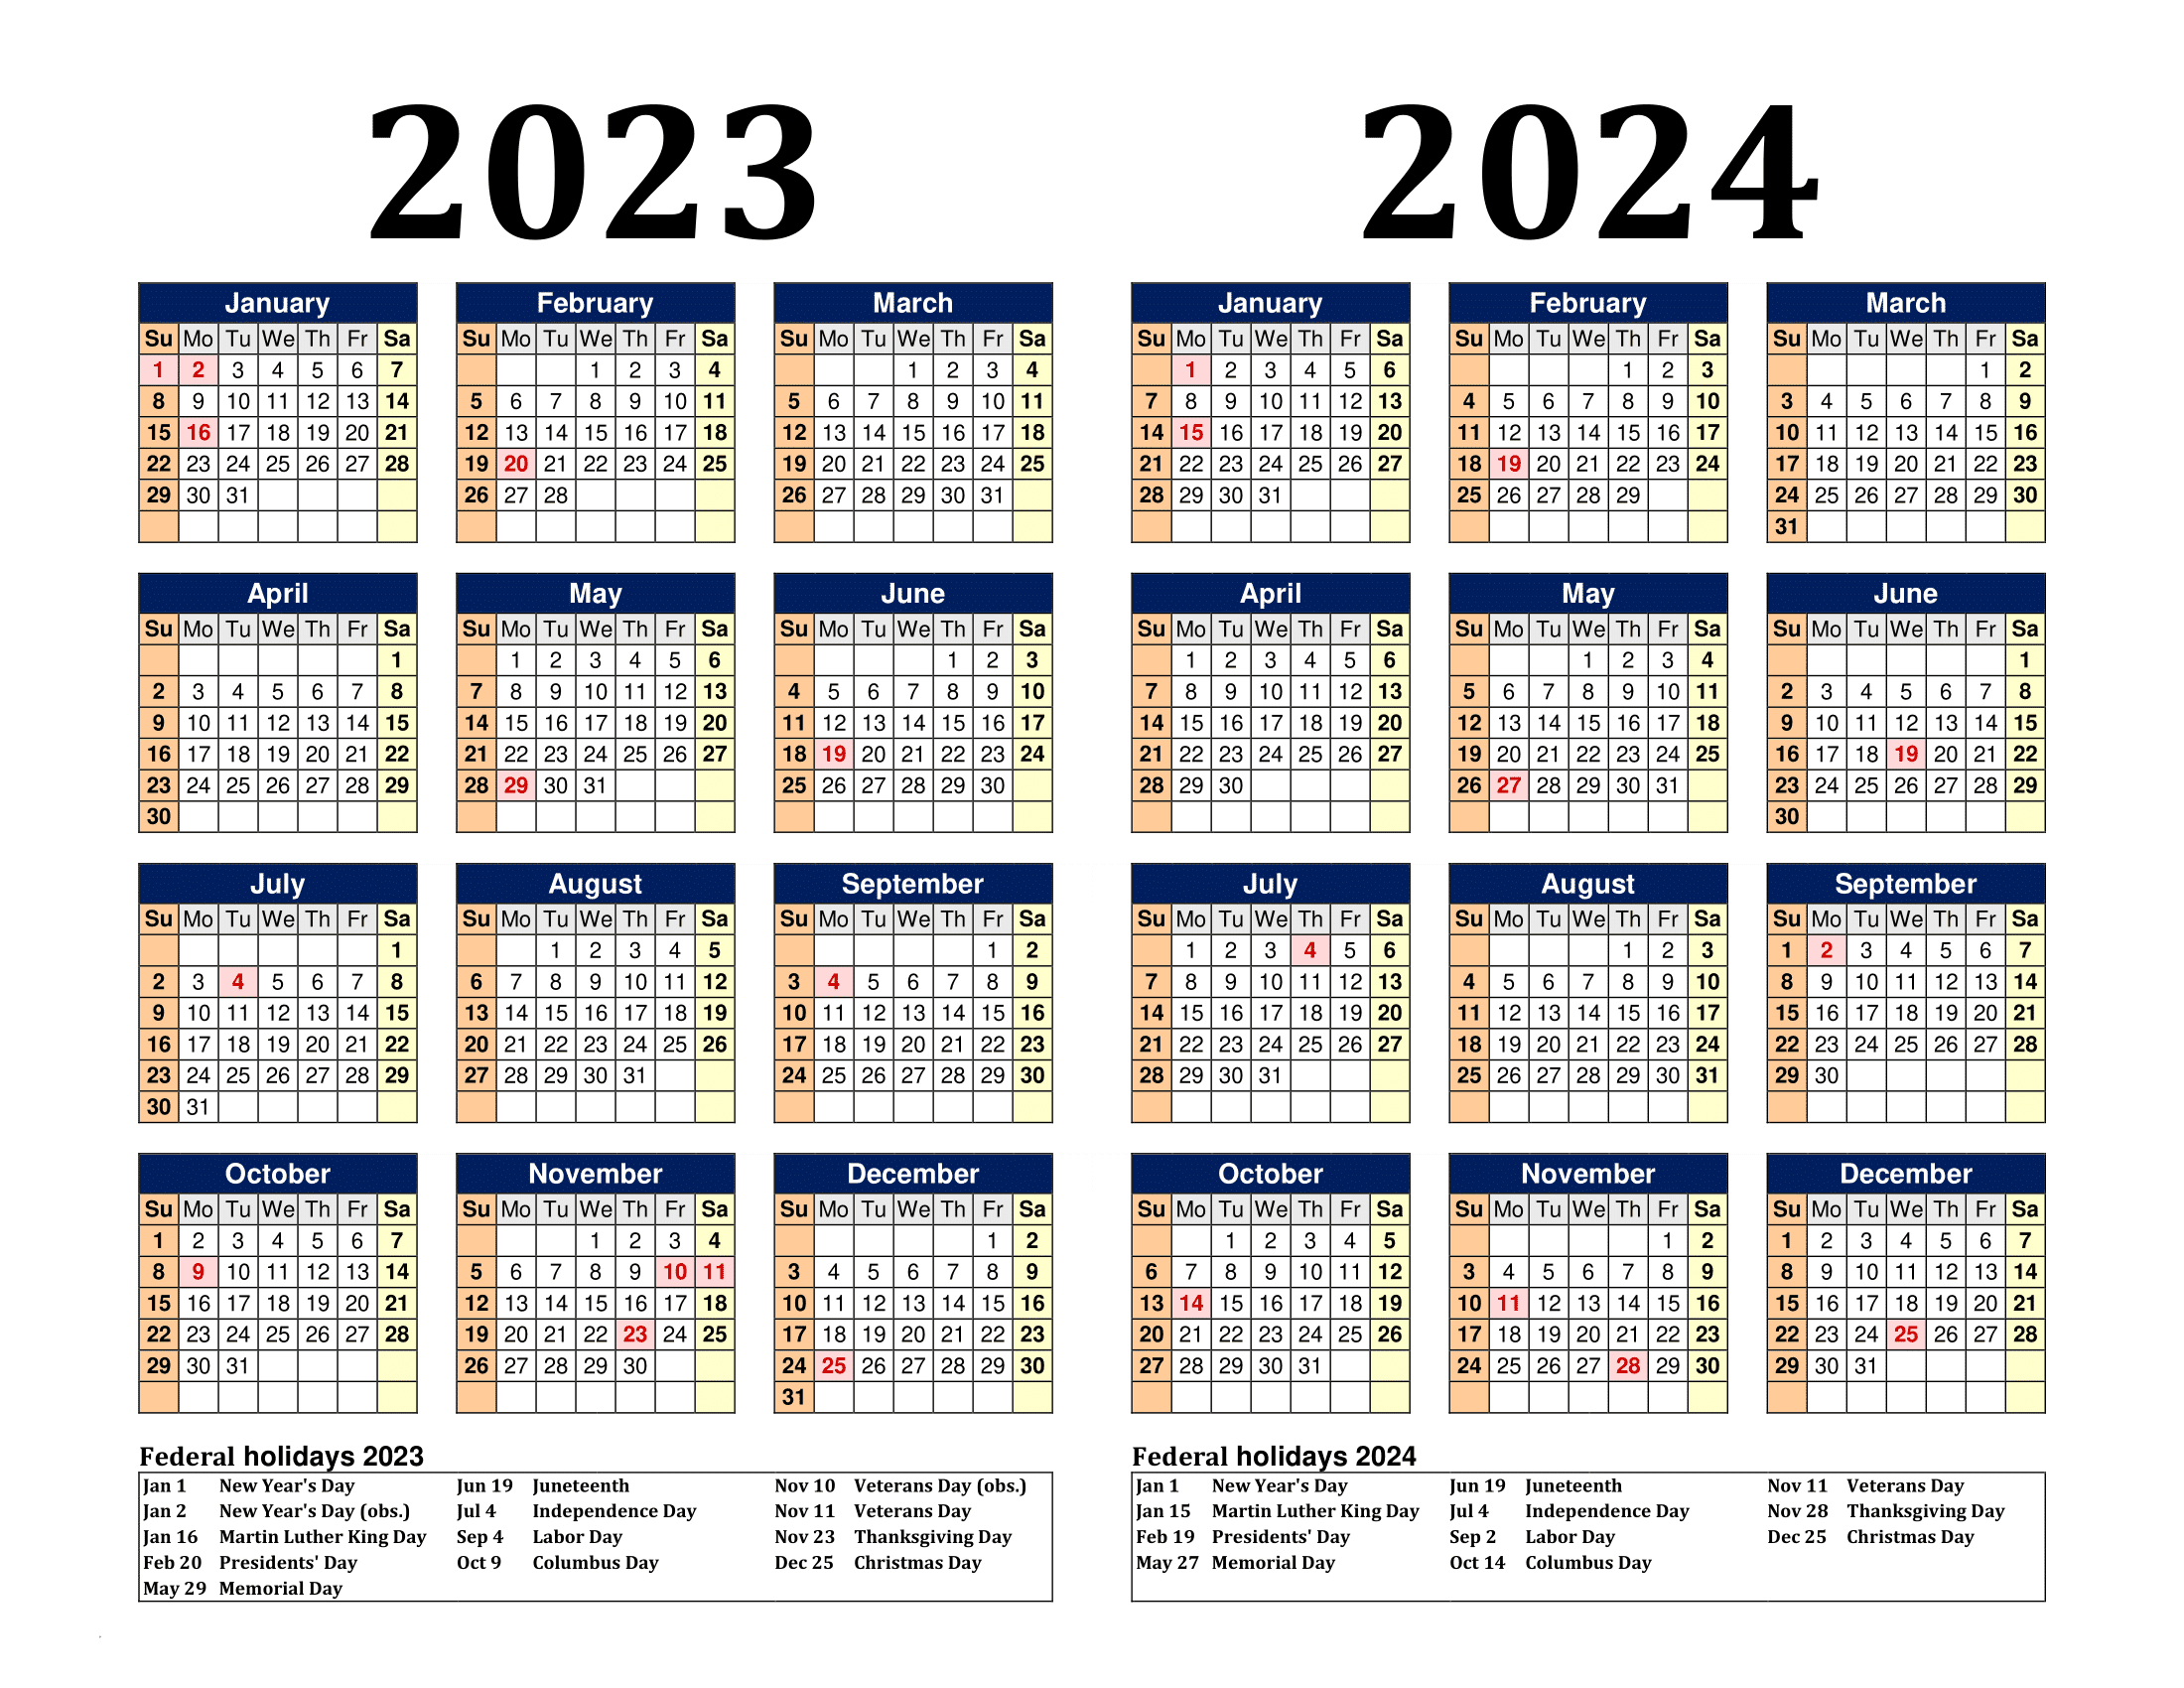 Free Printable Two Year Calendar Templates For 2023 And 2024 In Pdf | Printable Calendar October 2023 to September 2024